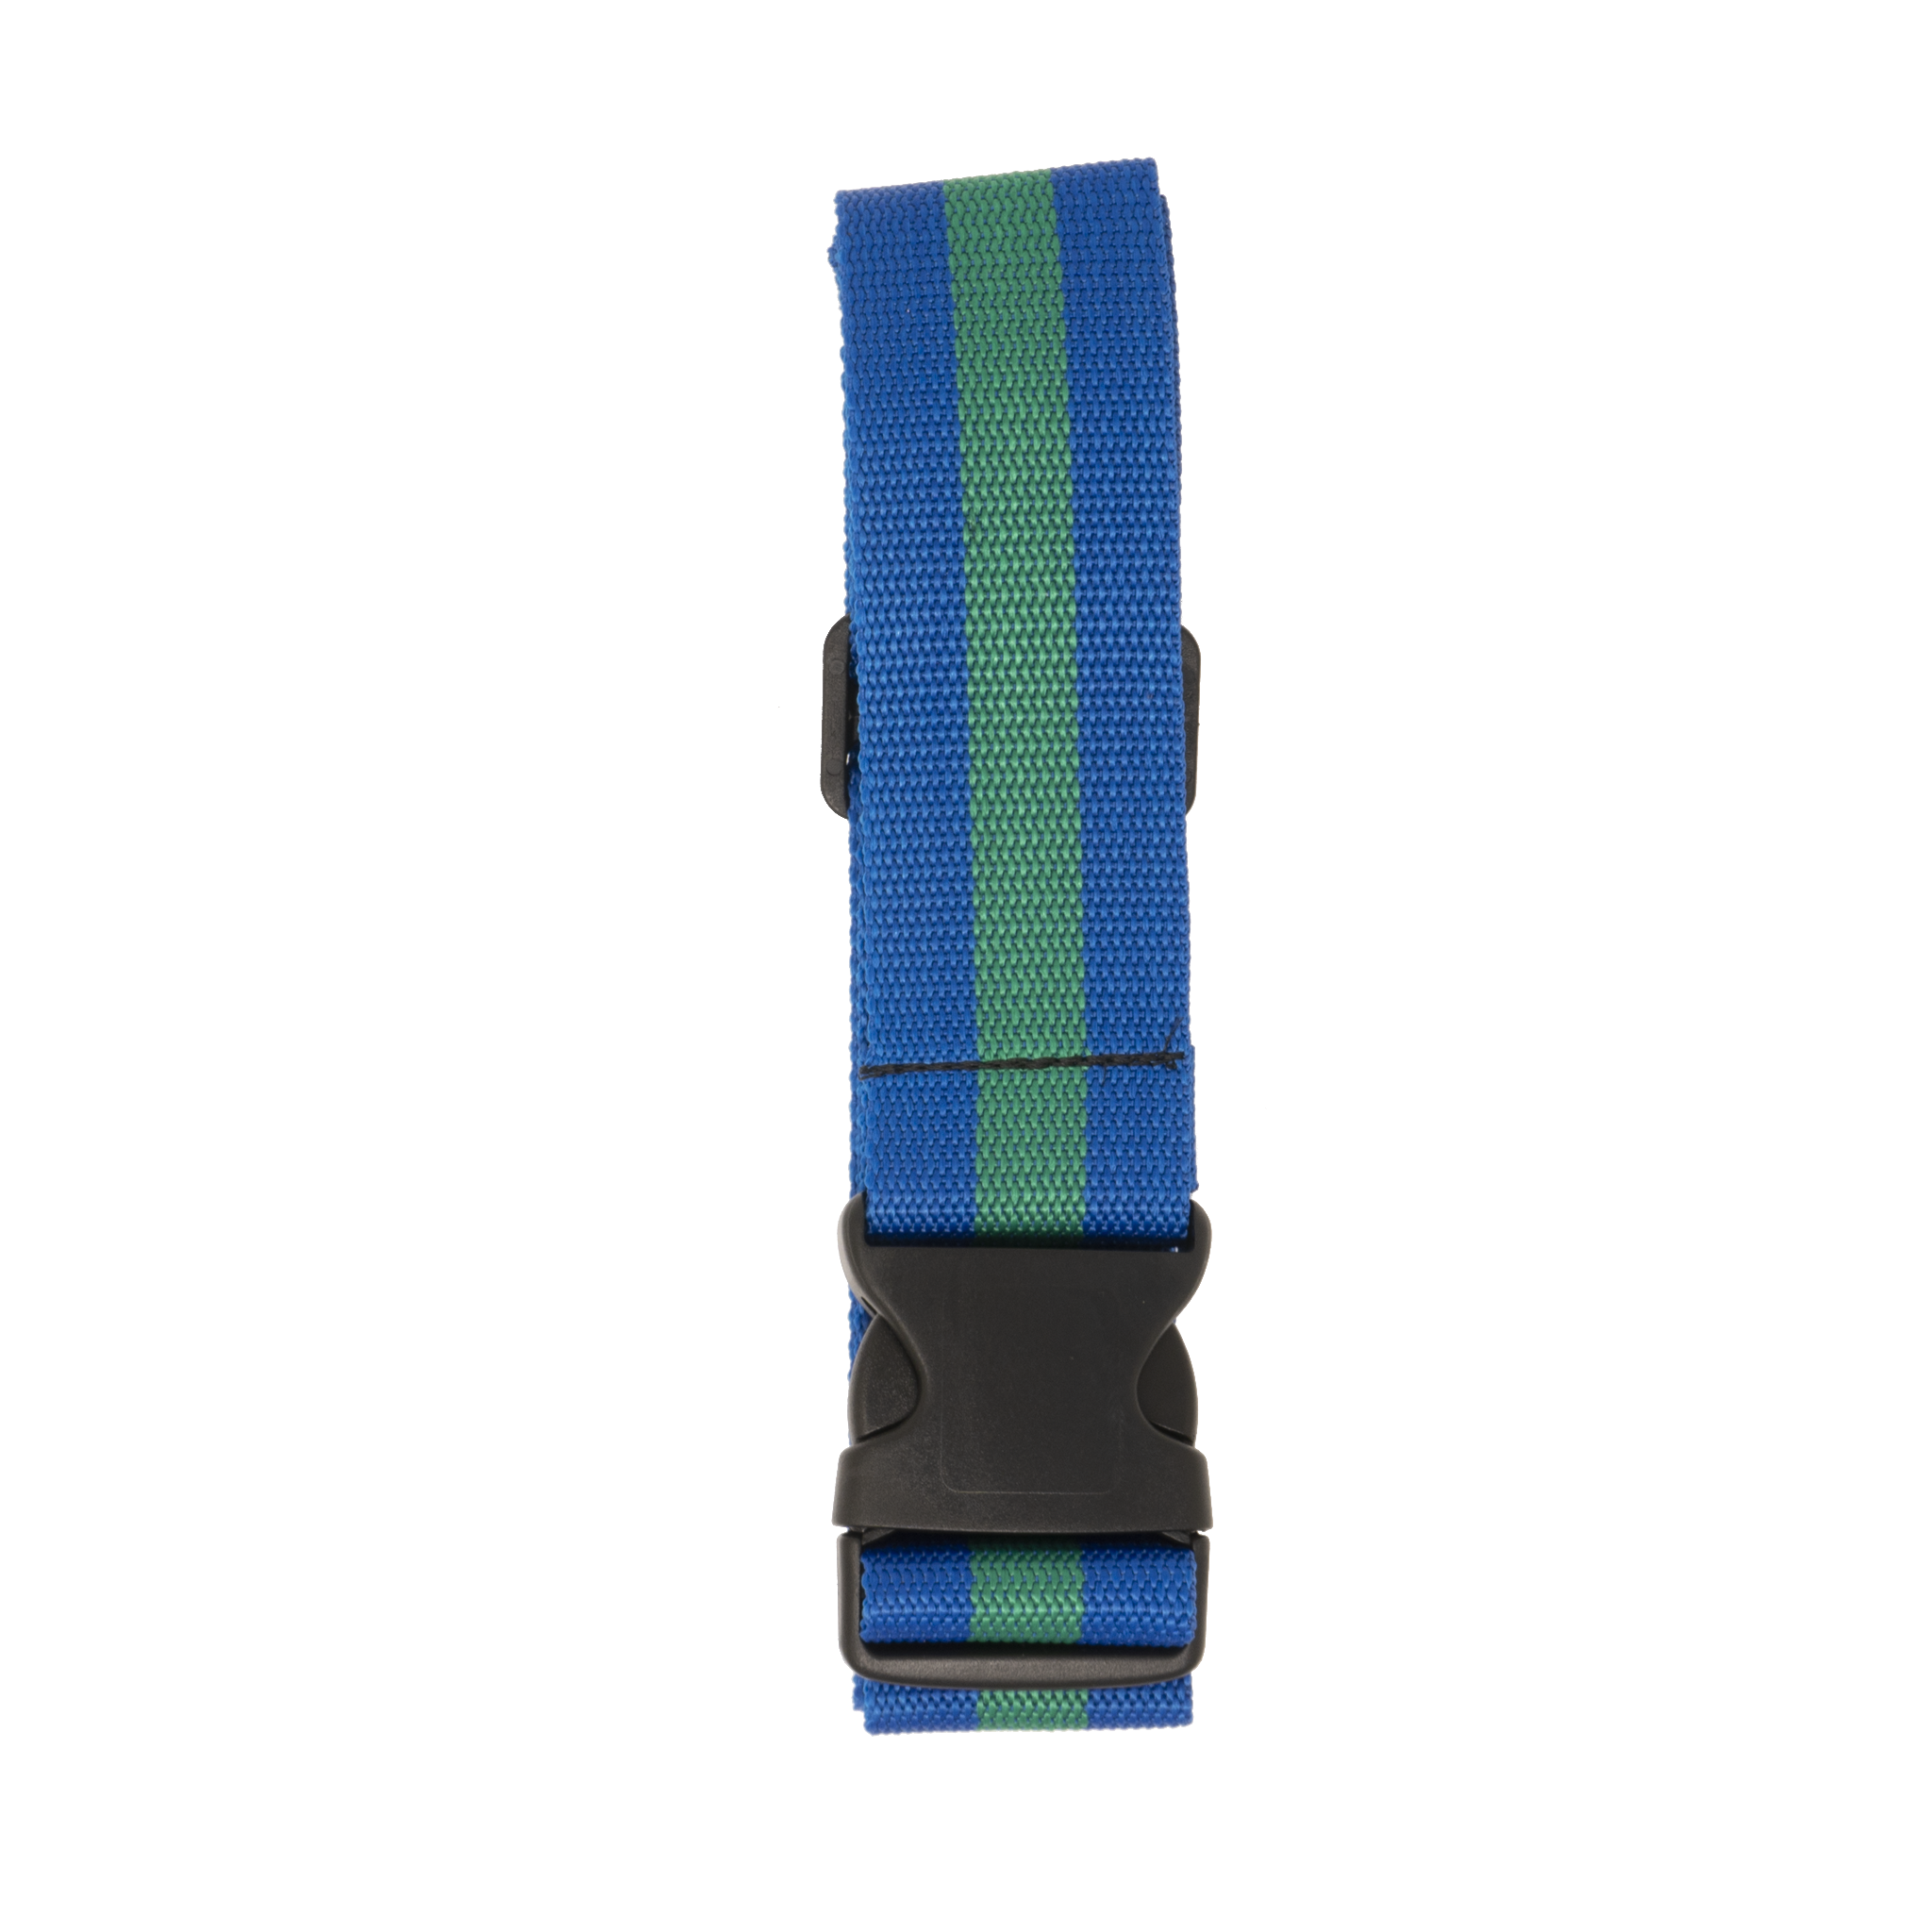 Luggage Strap - Solids